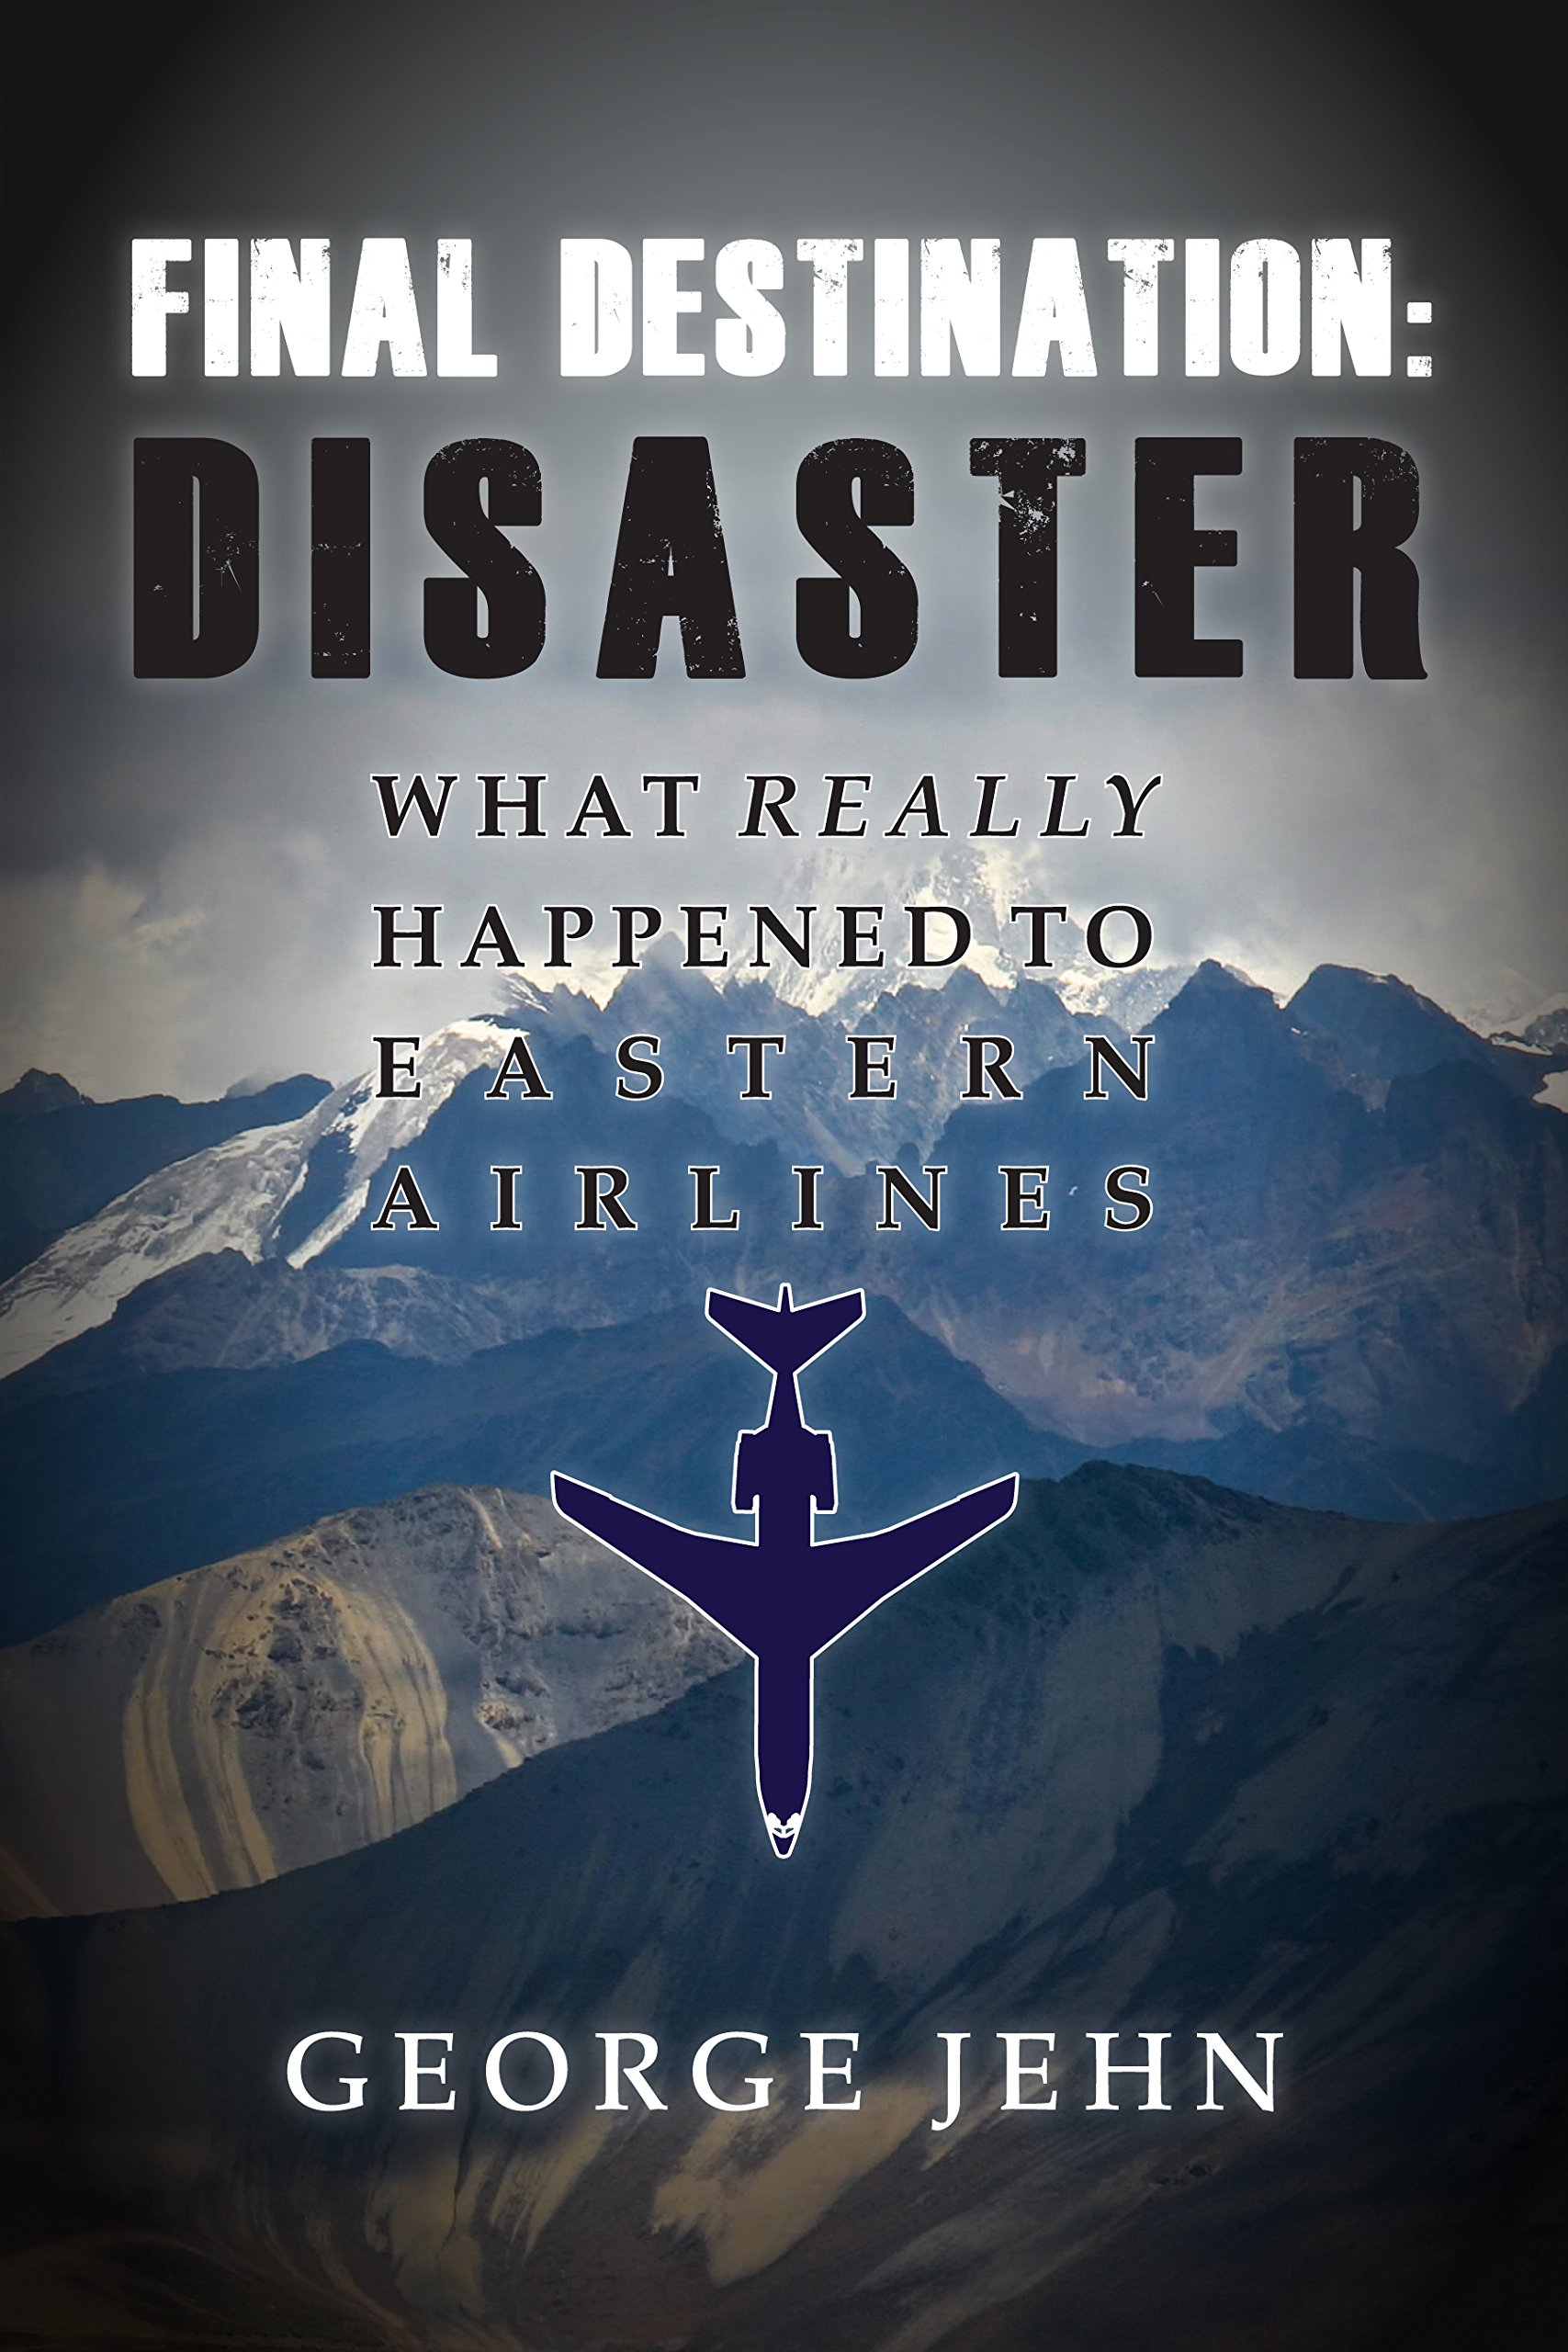 Final Destination: Disaster: What Really Happened to Eastern Air Lines